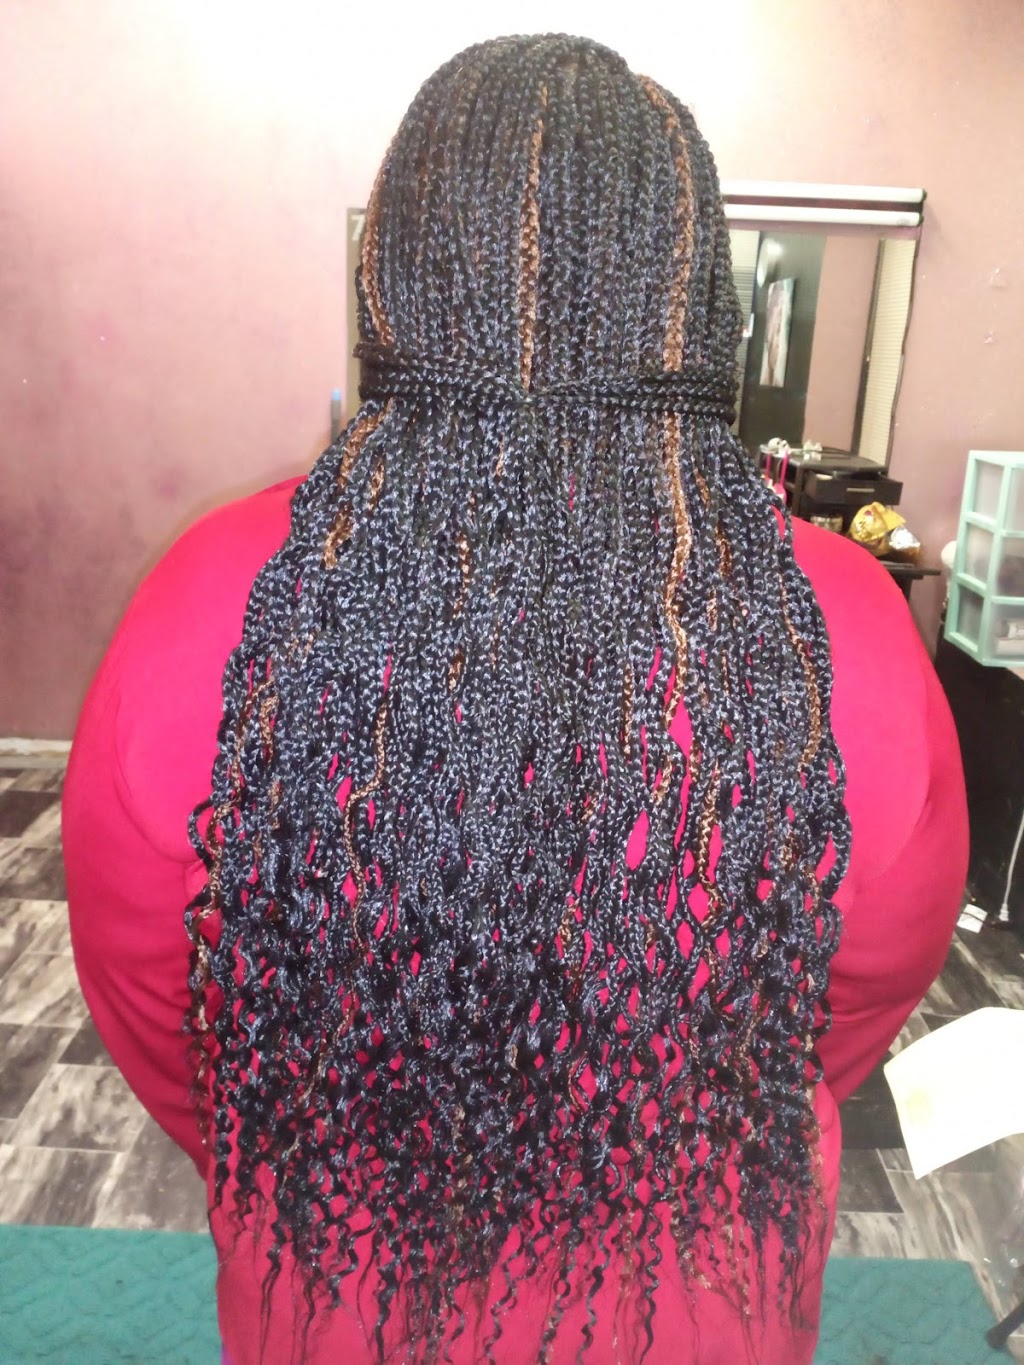 Braids and Styles by Nicole | 2058 N. Peachtree Rd. Mesquite, Texas75149, 2058 N Peachtree Rd, Mesquite, TX 75149 | Phone: (214) 462-8509